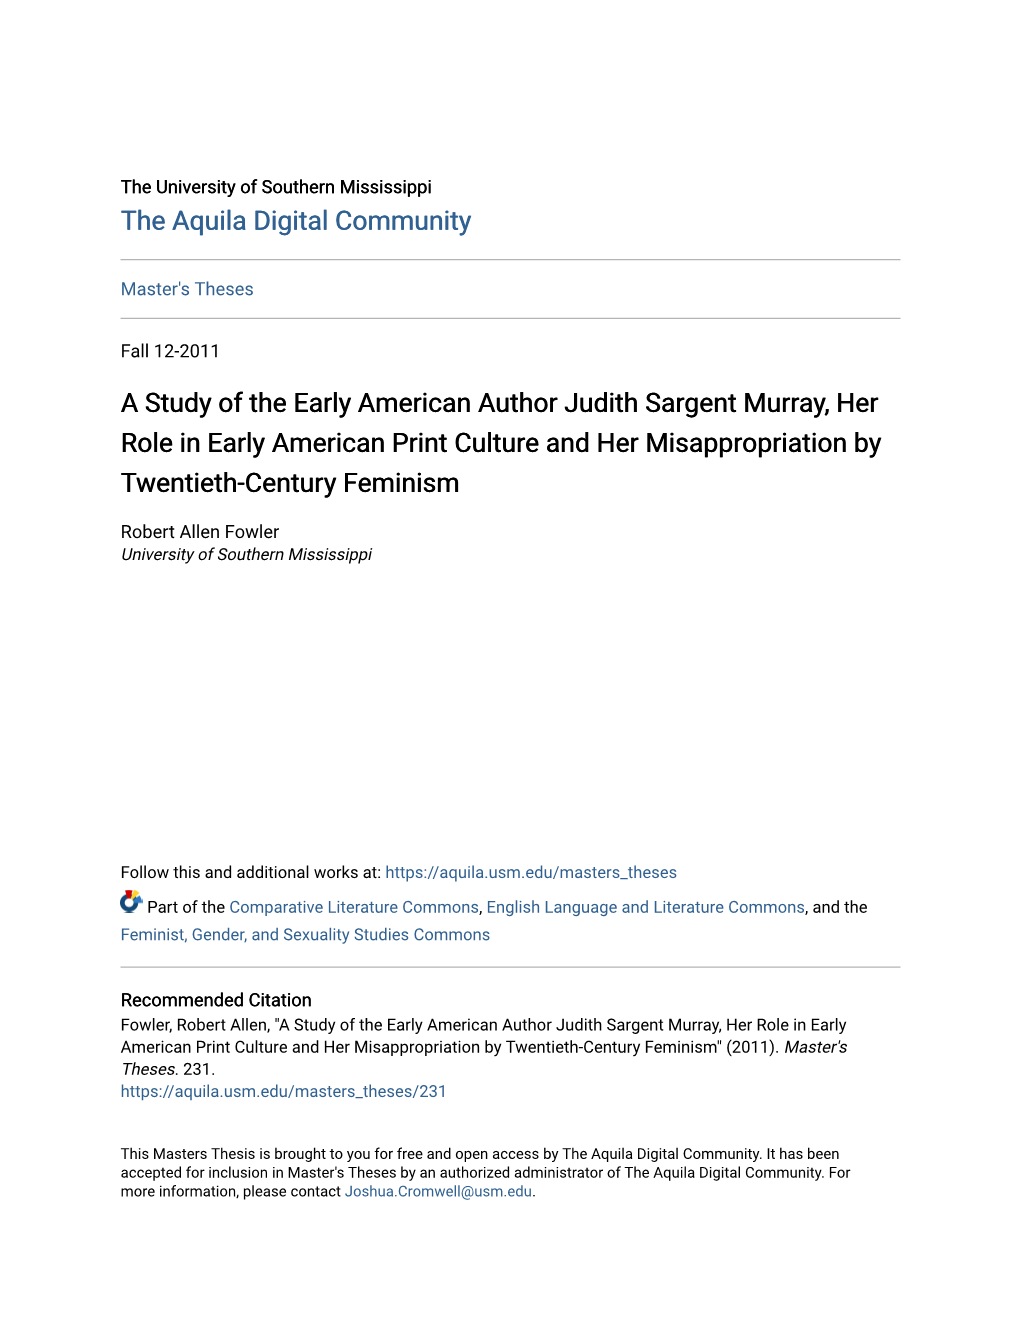 A Study of the Early American Author Judith Sargent Murray, Her Role in Early American Print Culture and Her Misappropriation by Twentieth-Century Feminism